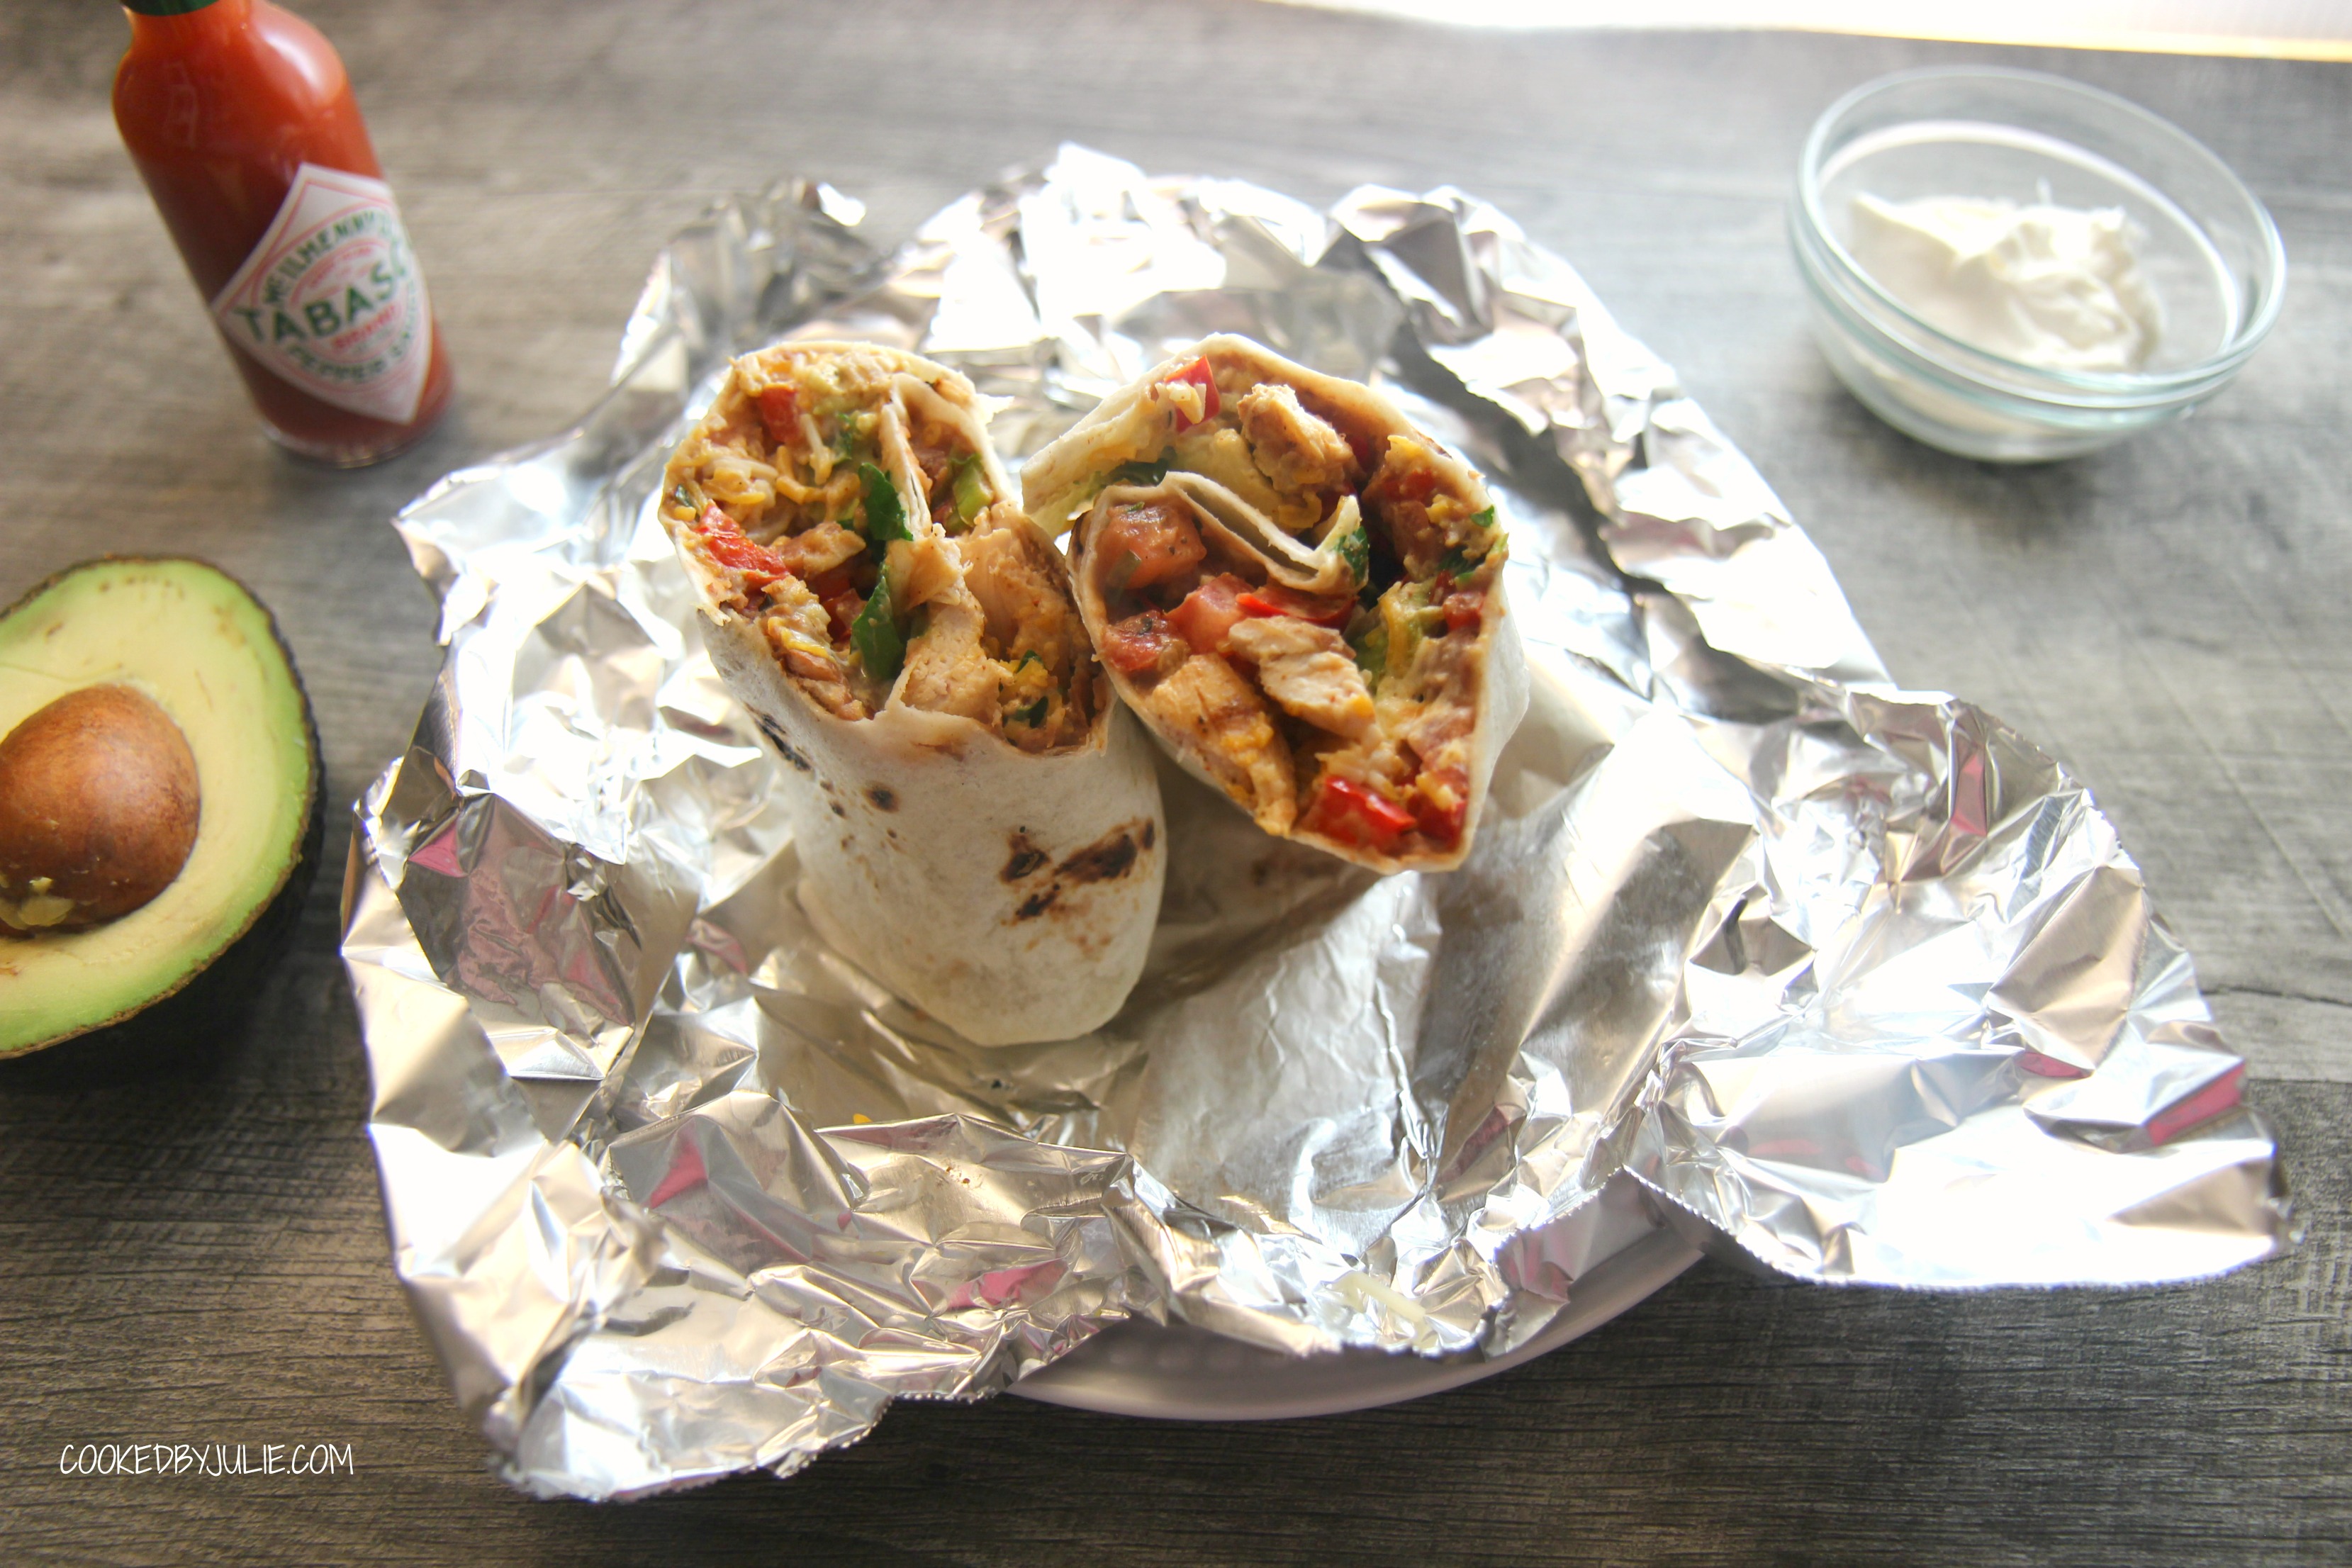 Wrap in foil and pack for a delicious homemade lunch. 